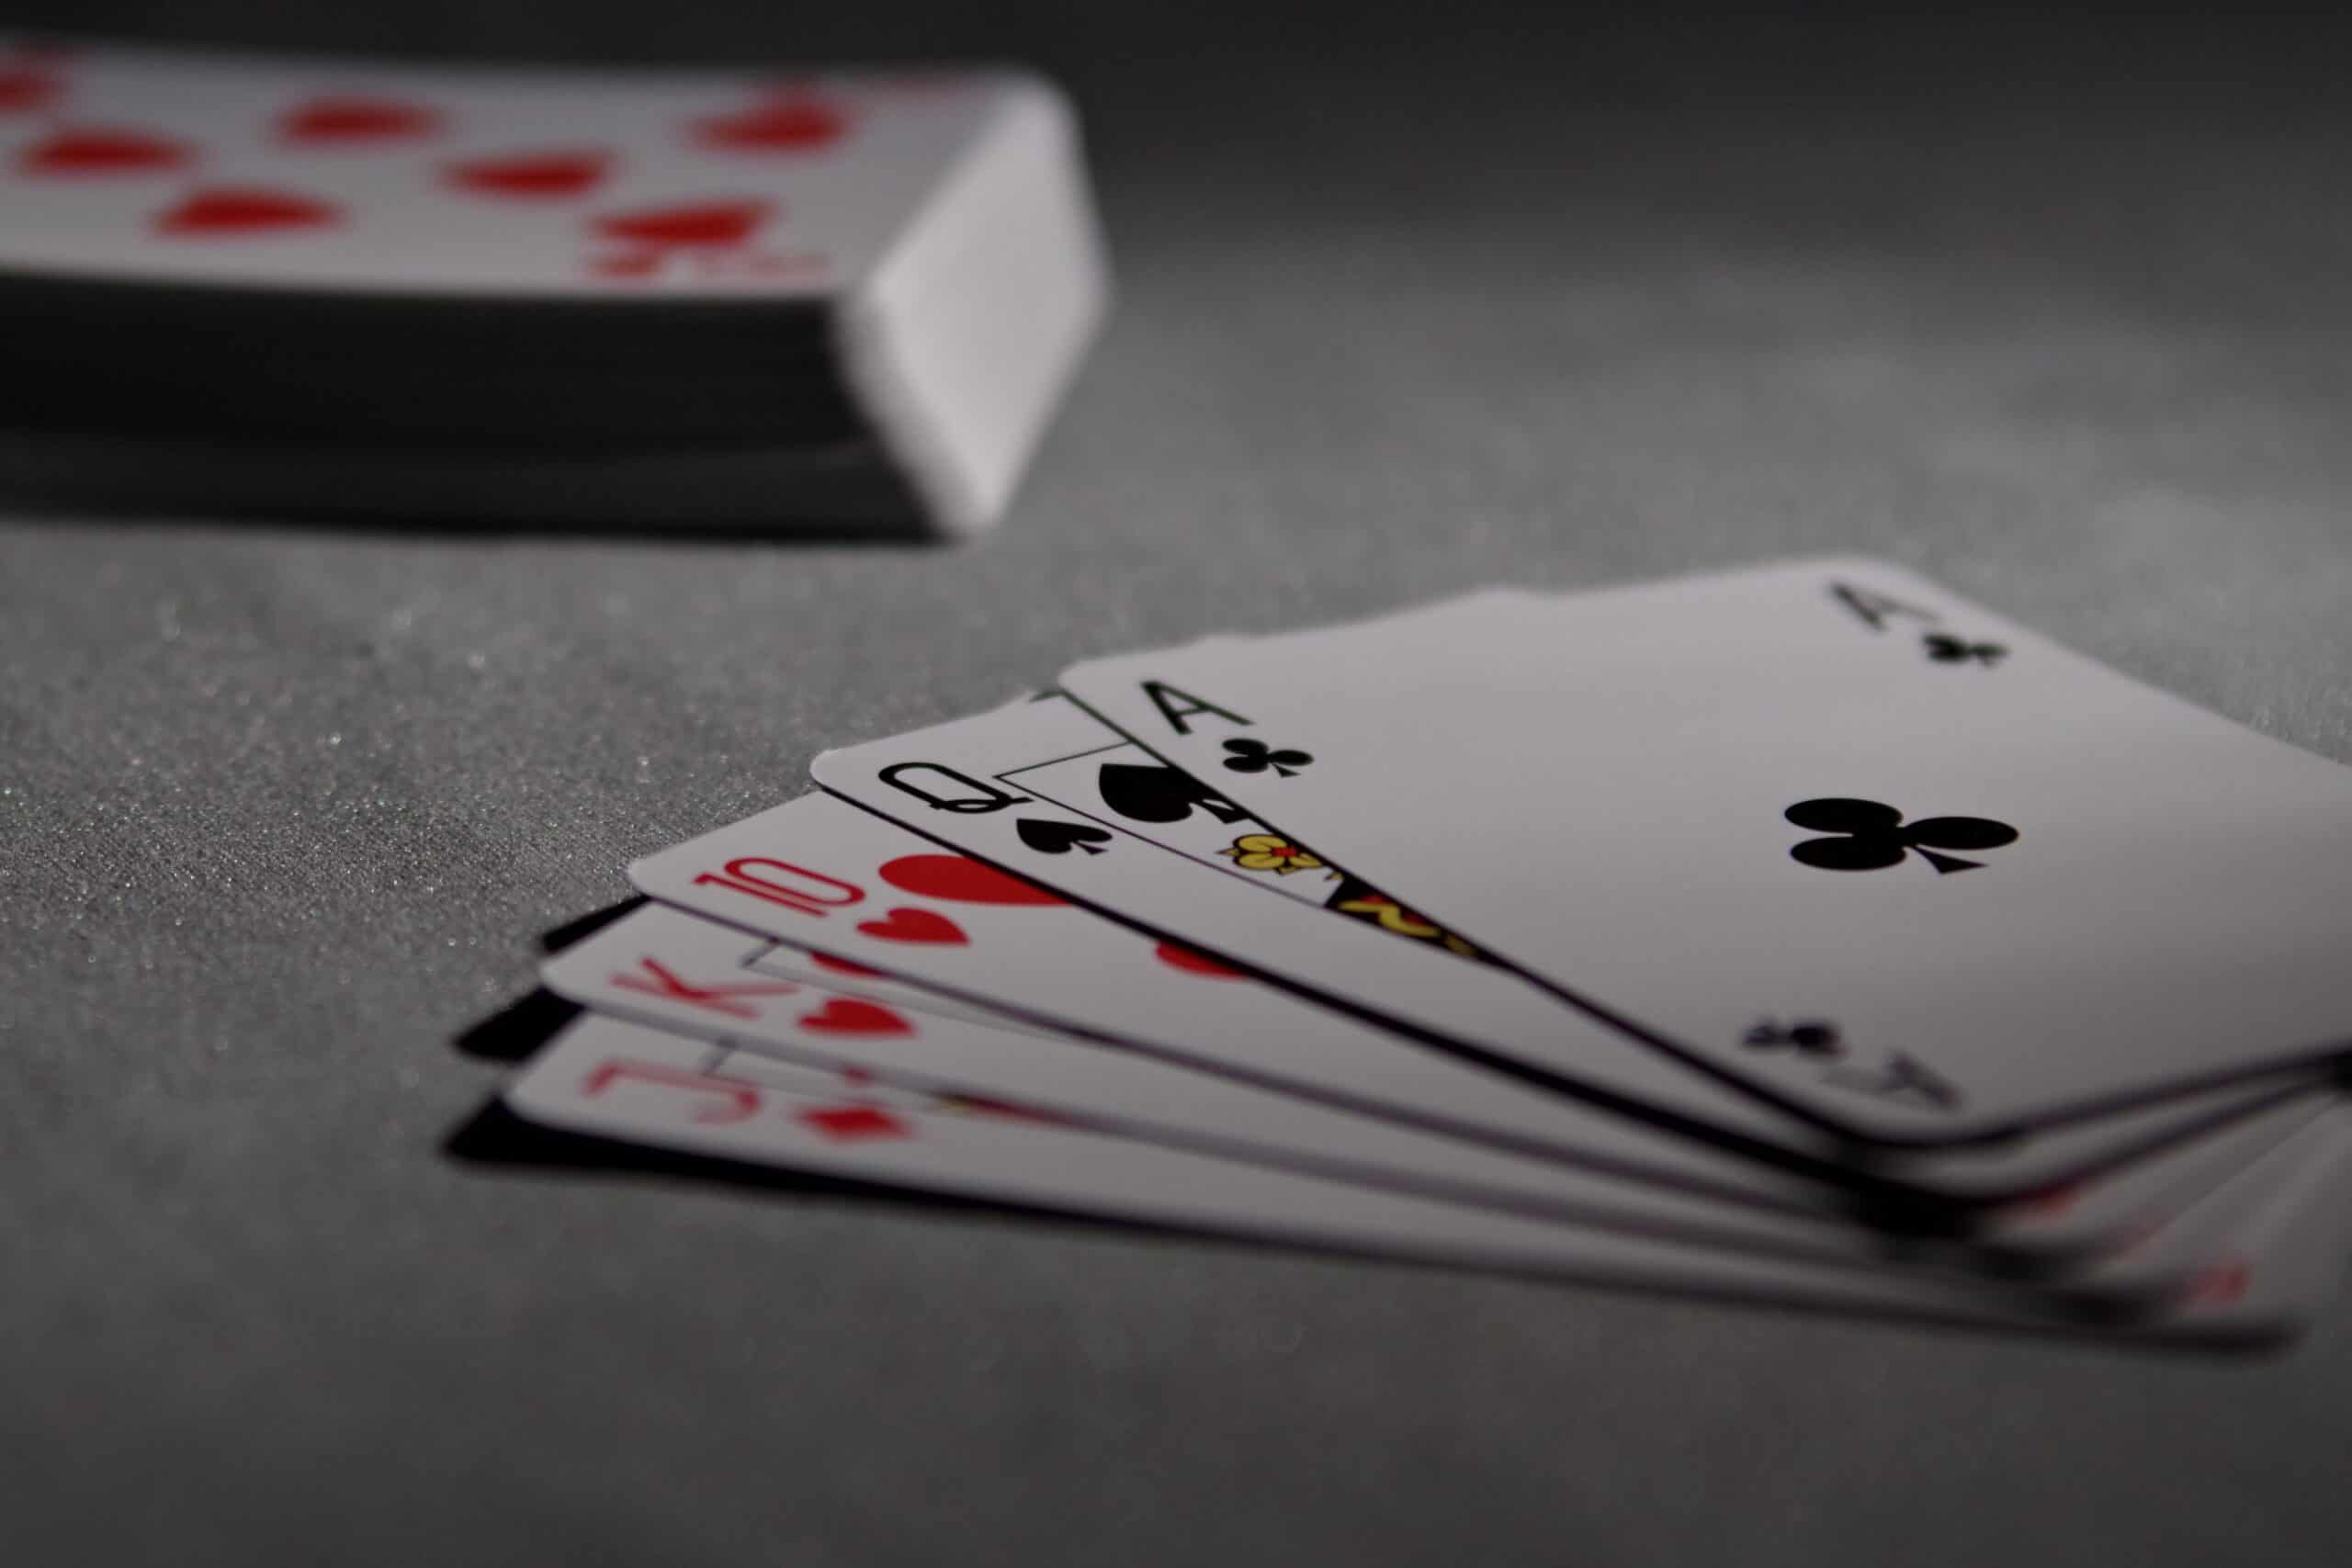 Play Your Cards Rich With Reviews Based on Real User Experience